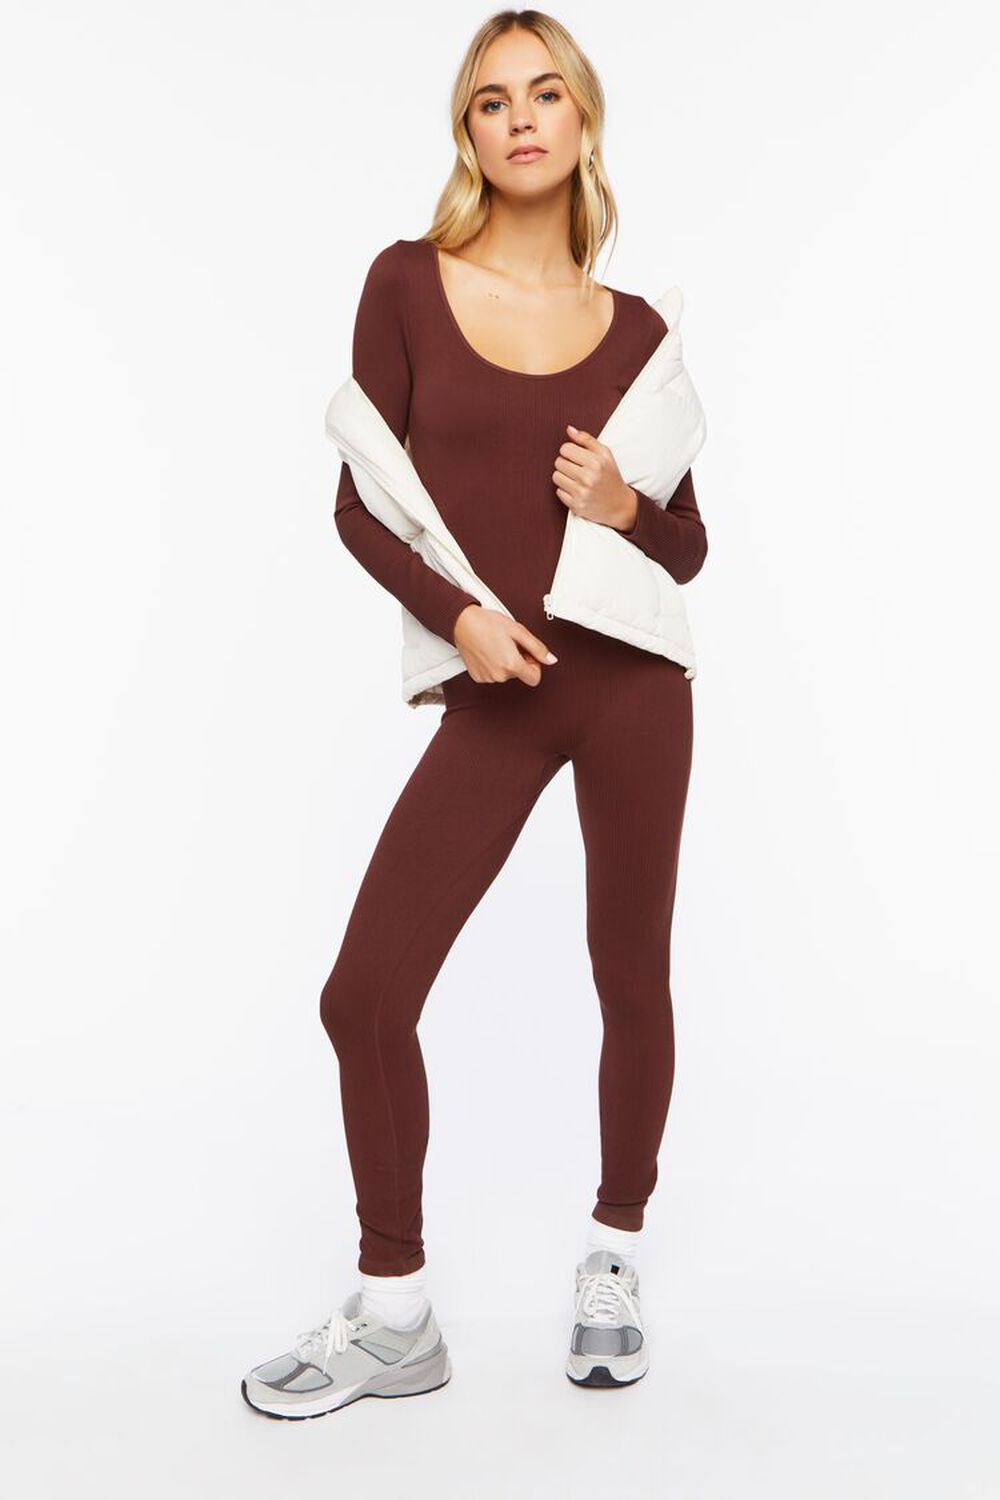 BROWN Seamless Ribbed Jumpsuit, image 1